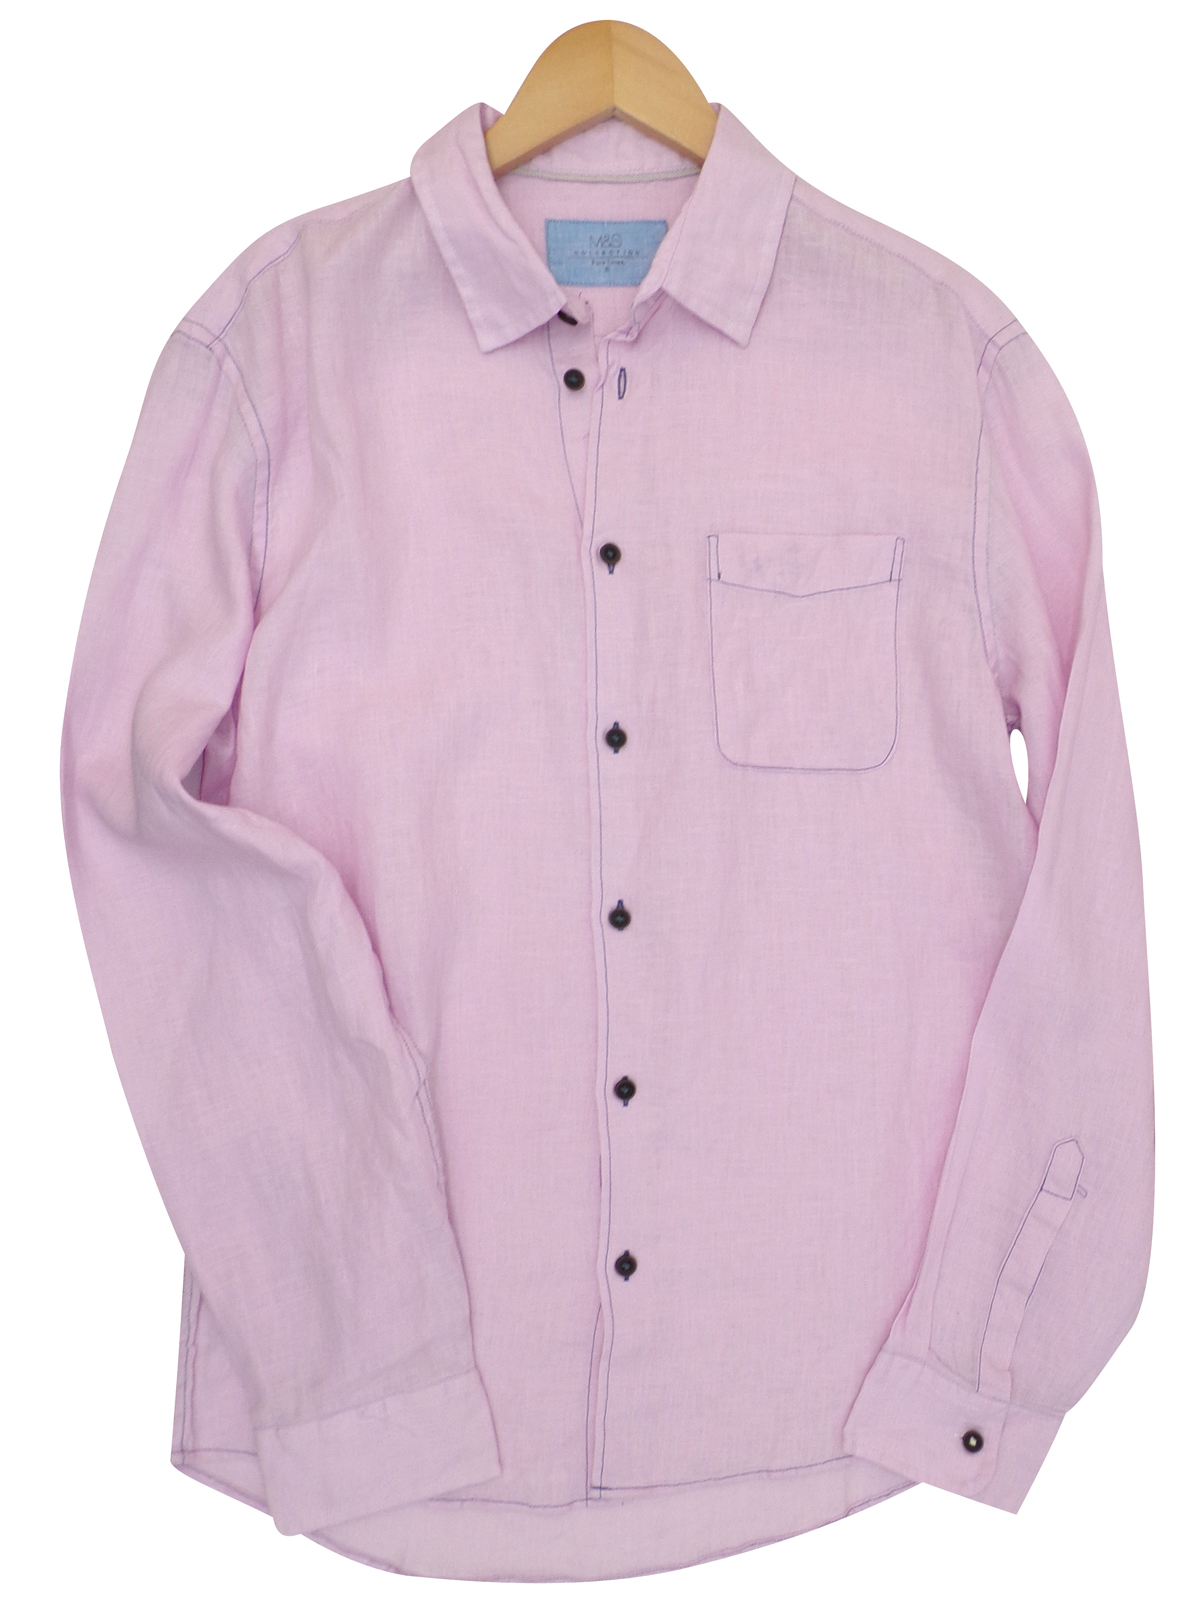 Marks and Spencer - - M&5 ASSORTED Pure Cotton Long Sleeve Shirts ...